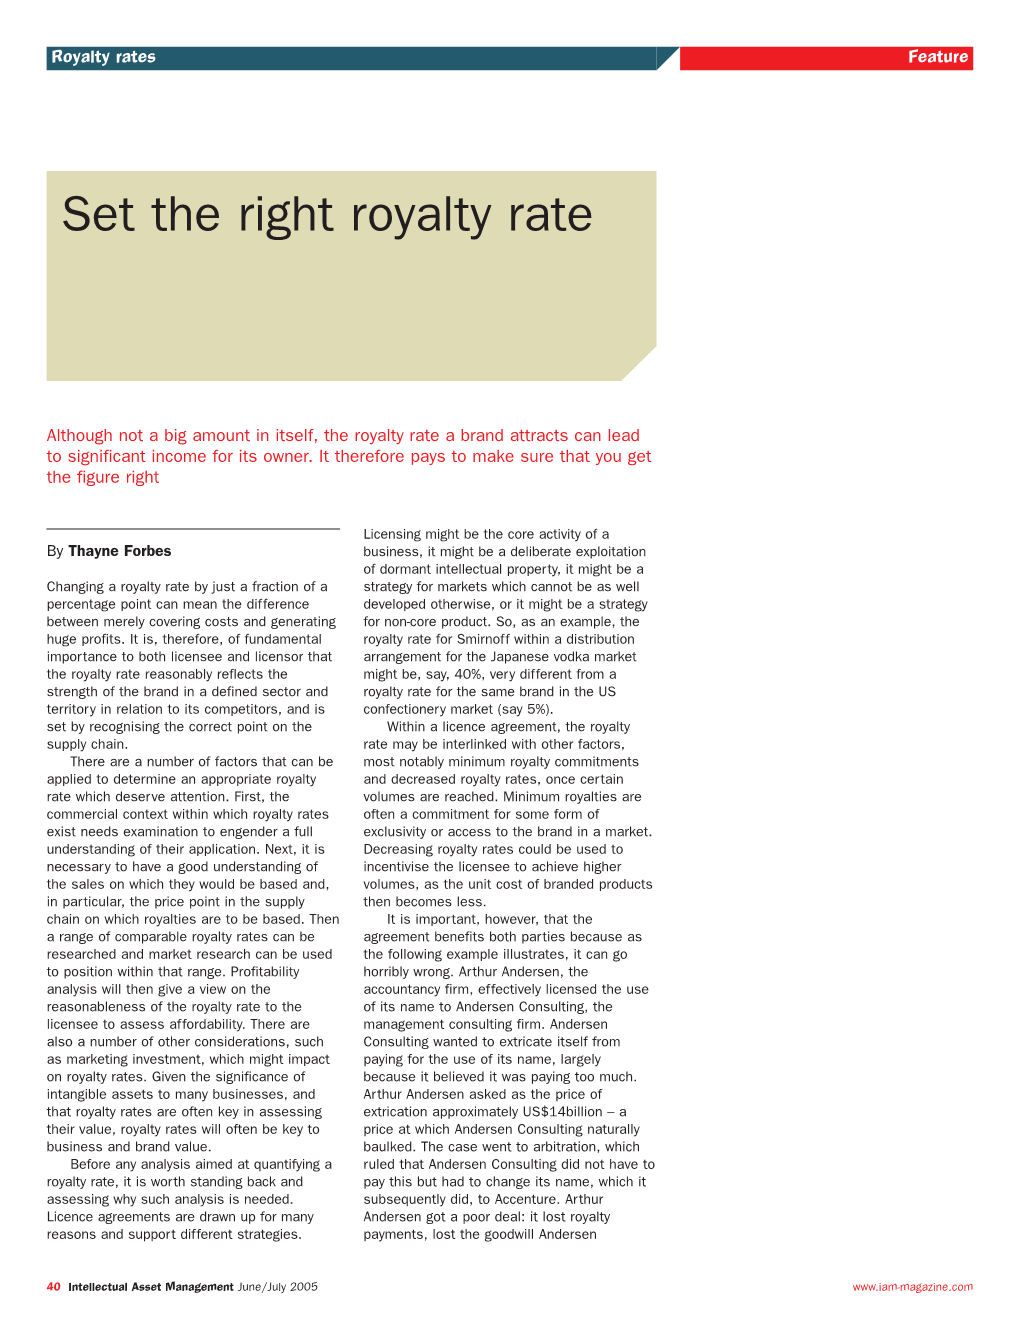 Set the Right Royalty Rate